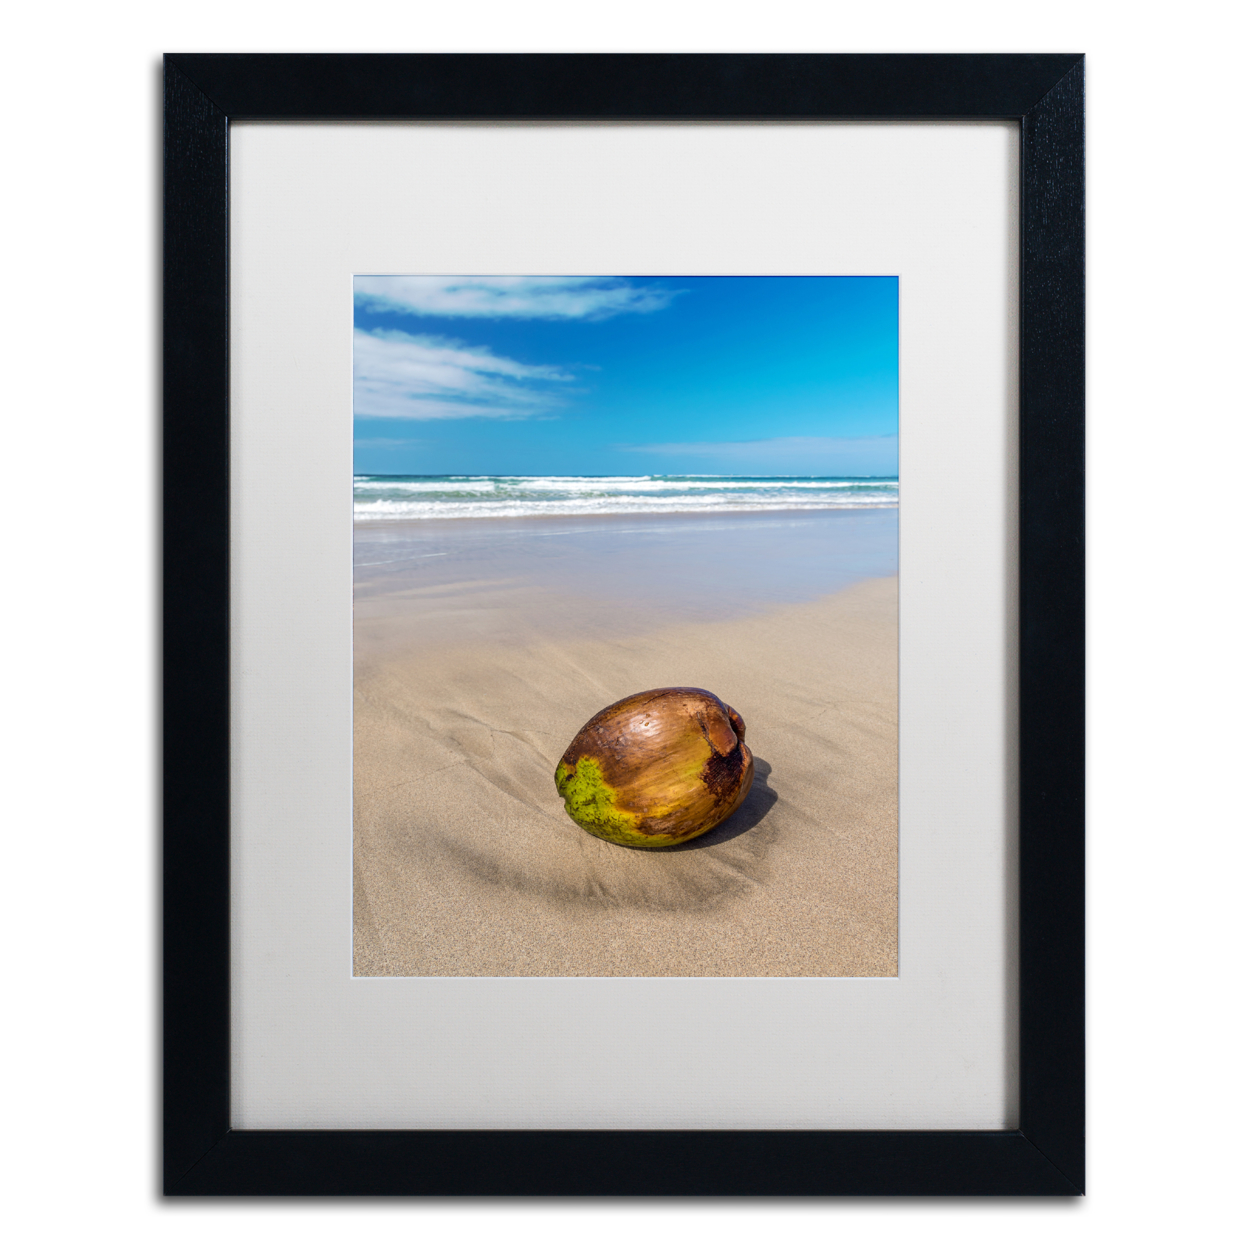 Pierre Leclerc 'Beached Coconut' Black Wooden Framed Art 18 X 22 Inches